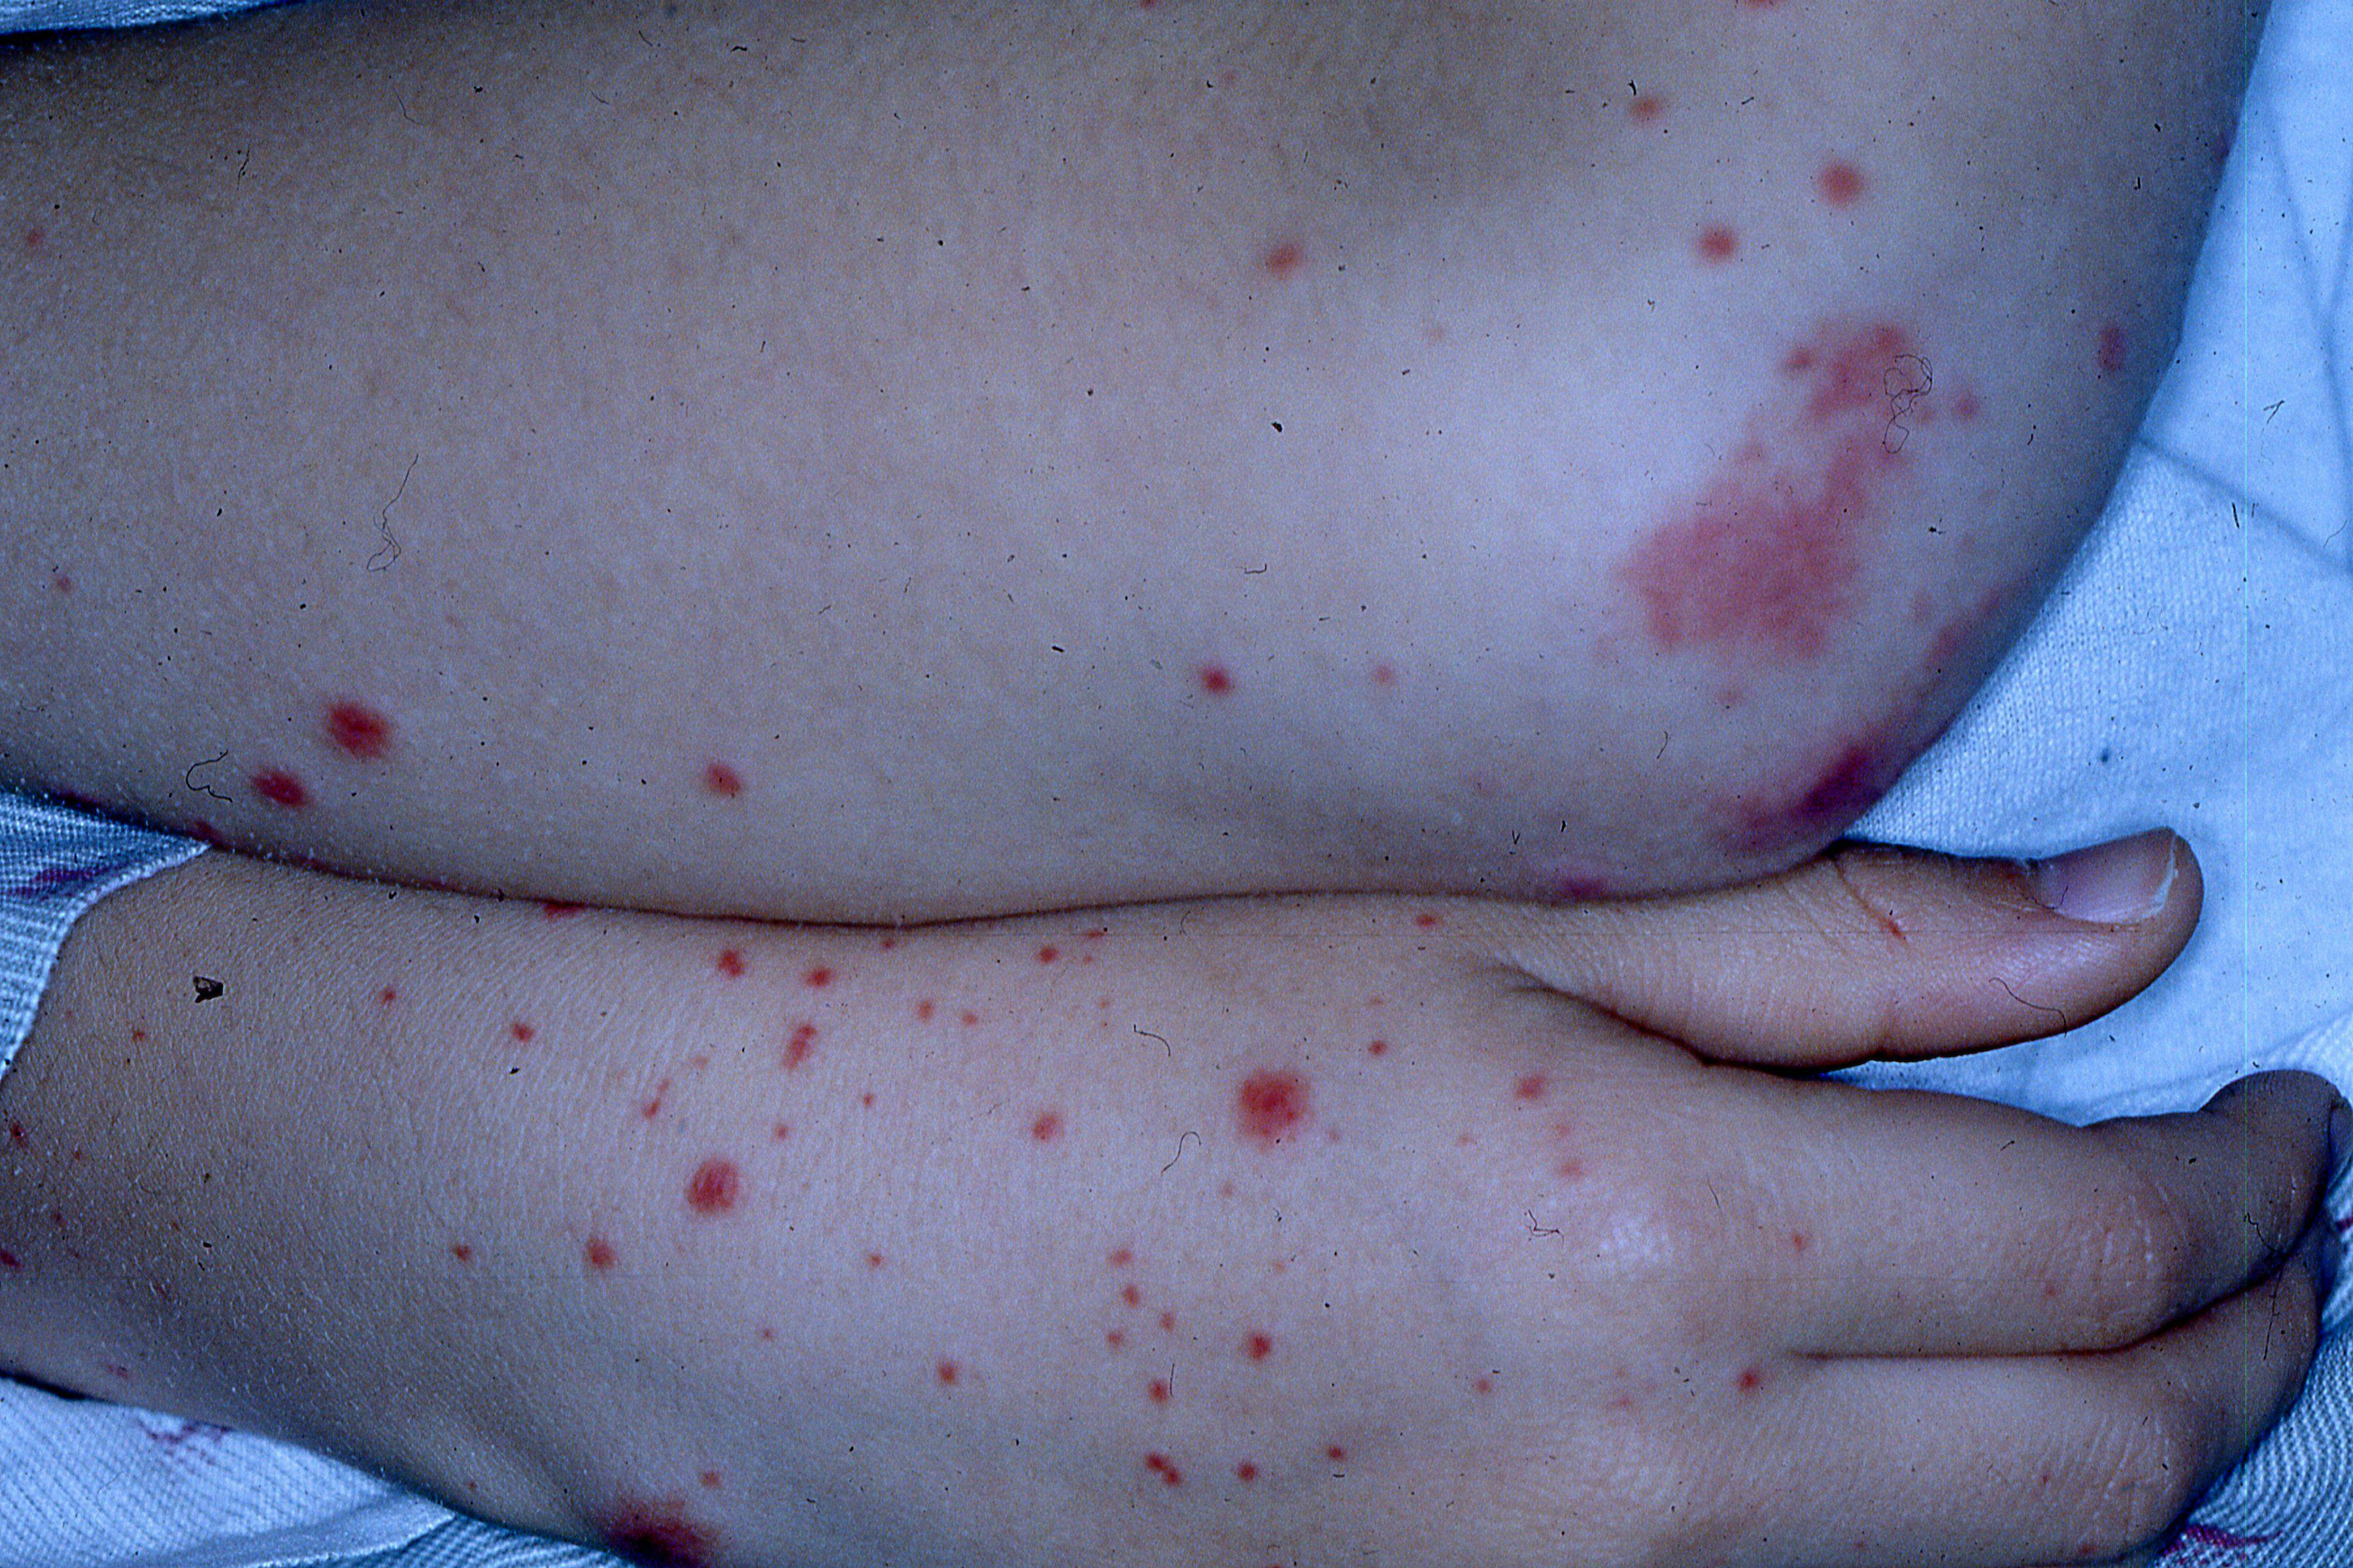 Purpuric papules in a child with acute pancreatitis